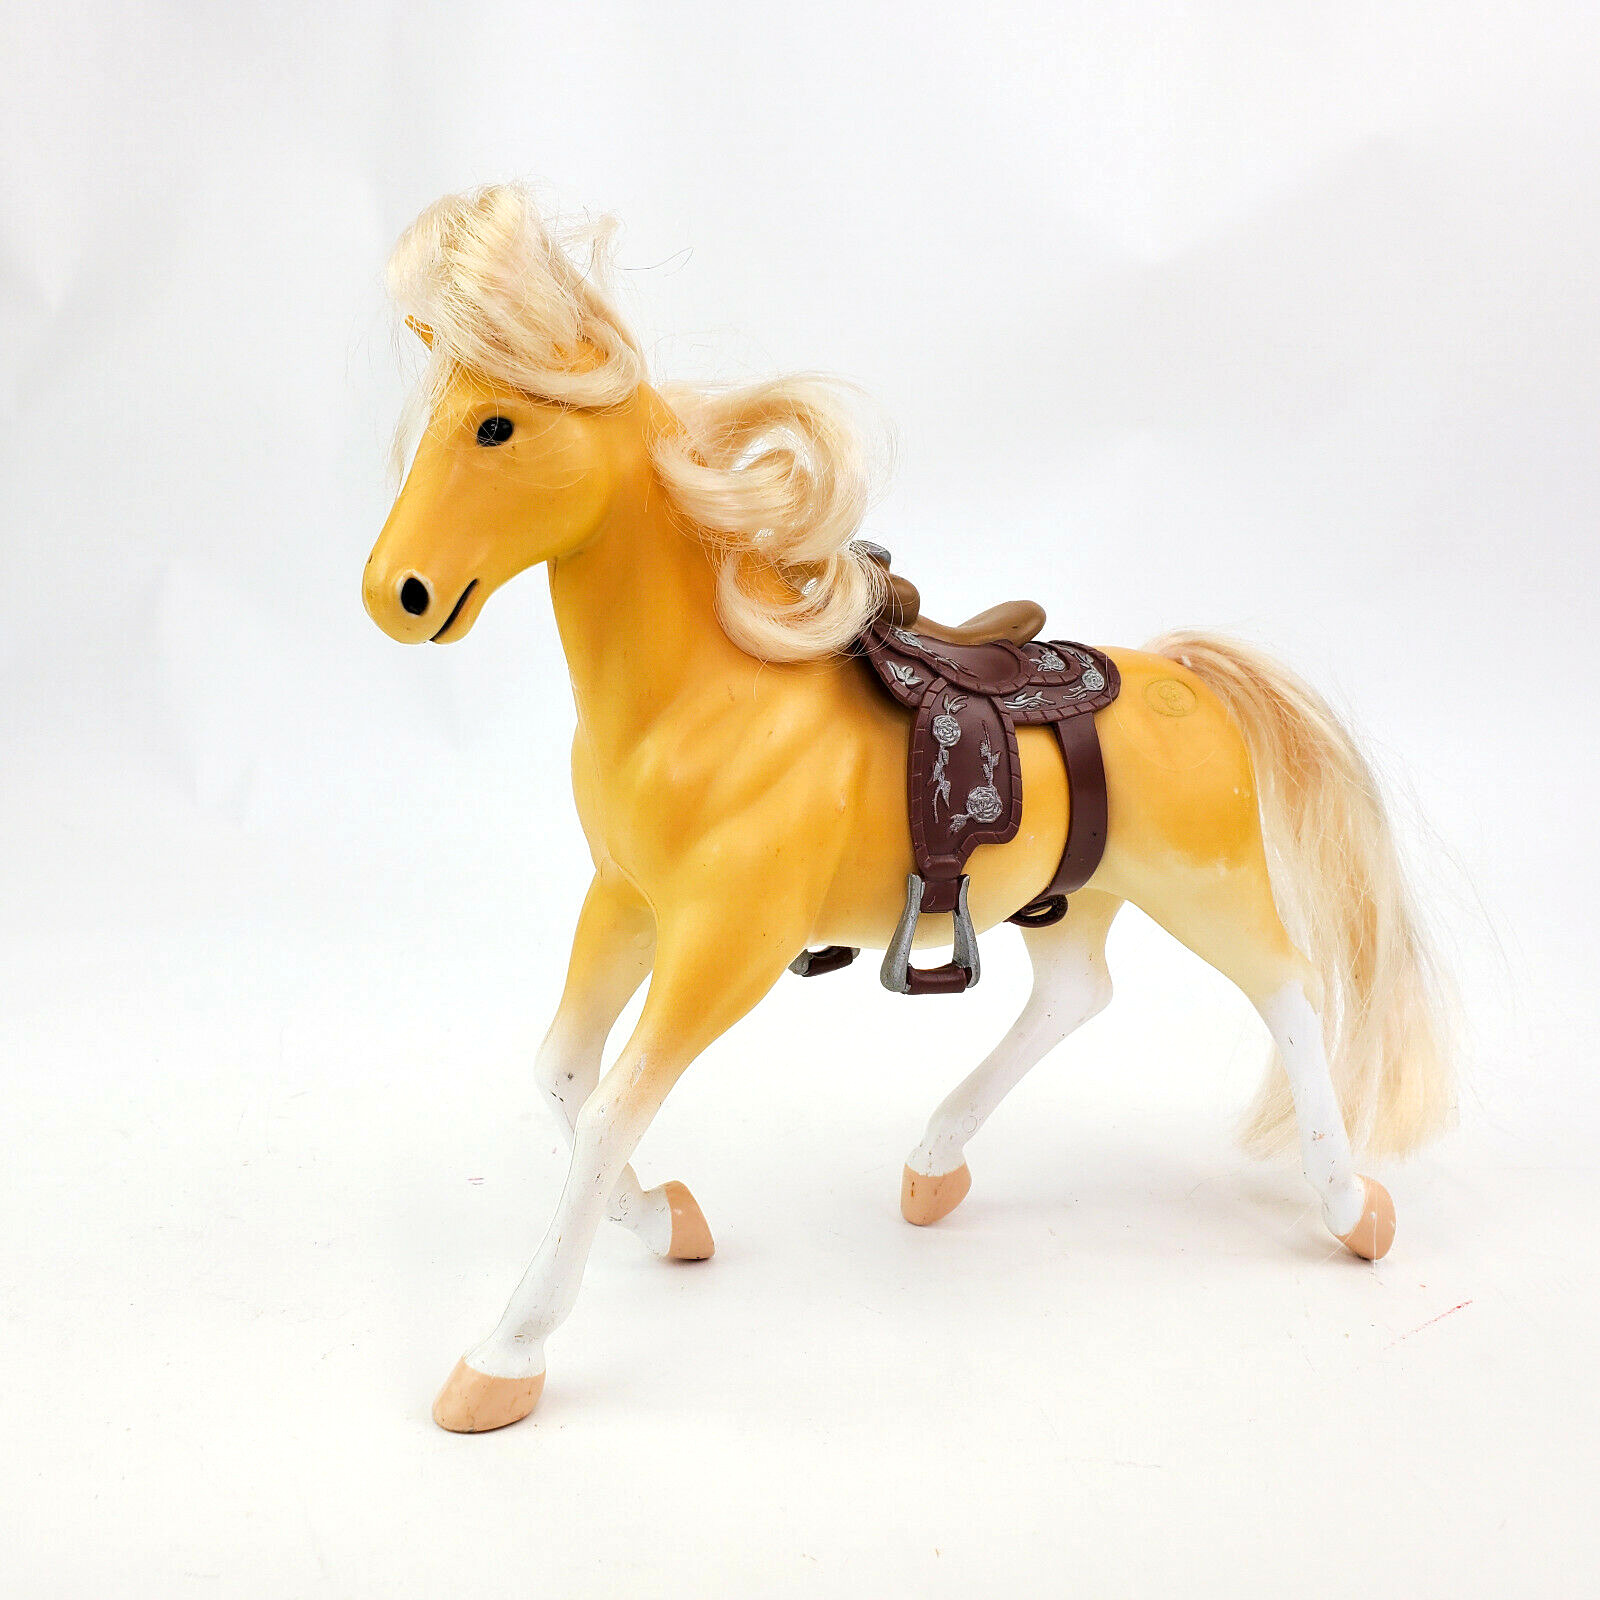 CC Branded Hard Plastic Tan Horse with Hair and Saddle Empire Toys Collectible